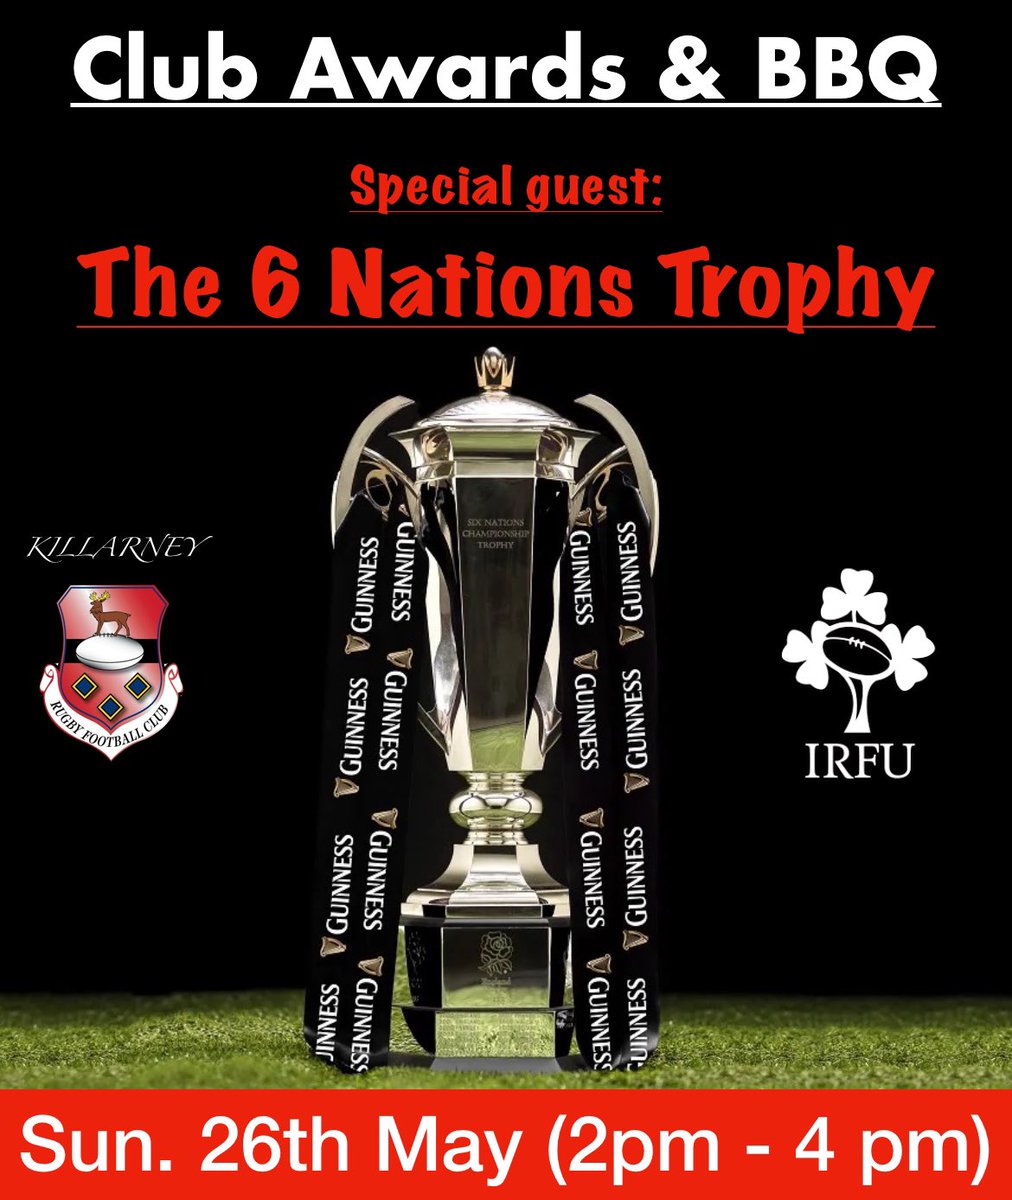 Breaking news: The Guinness 6 Nations trophy is coming to Killarney RFC! On Sunday the 26th of May next we are holding our annual club awards and bbq at Aghadoe, with a very special guest: the 6 Nations Trophy will be in attendance! All very welcome!